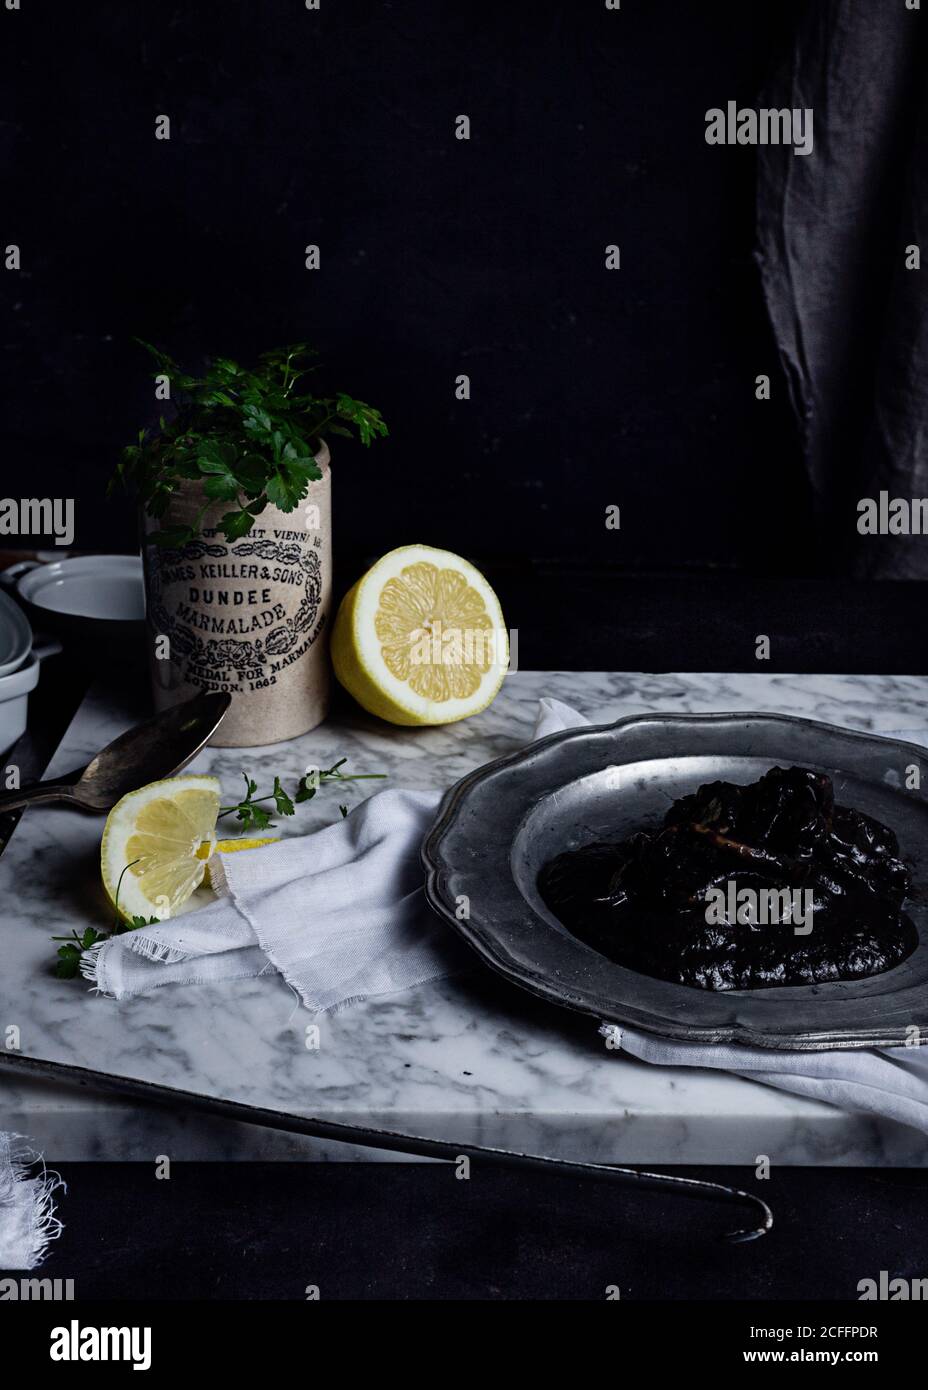 Metal plate with plum jelly placed on white fabric on table together with lime slices and bunch of parsley Stock Photo